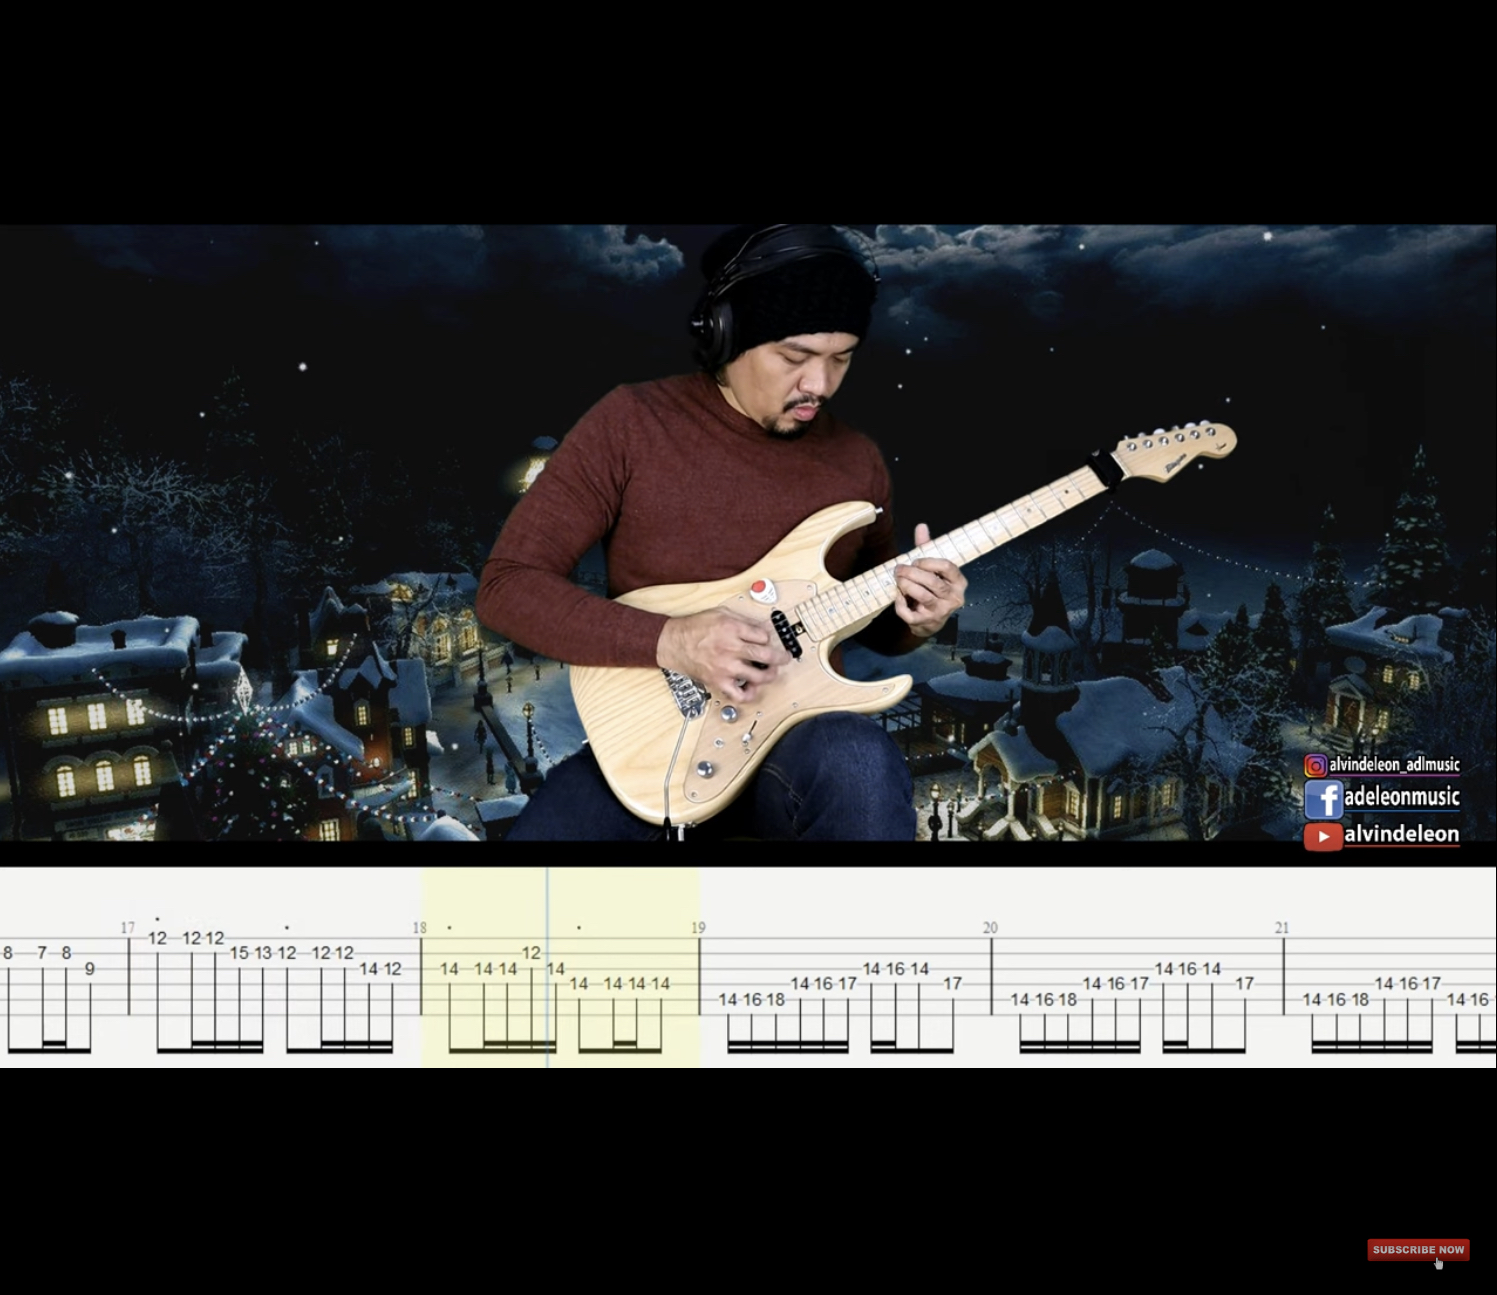 TRANS-SIBERIAN ORCHESTRA CAROL OF THE BELLS TABS and BACKING TRACK - ALVIN DE LEON (2020)